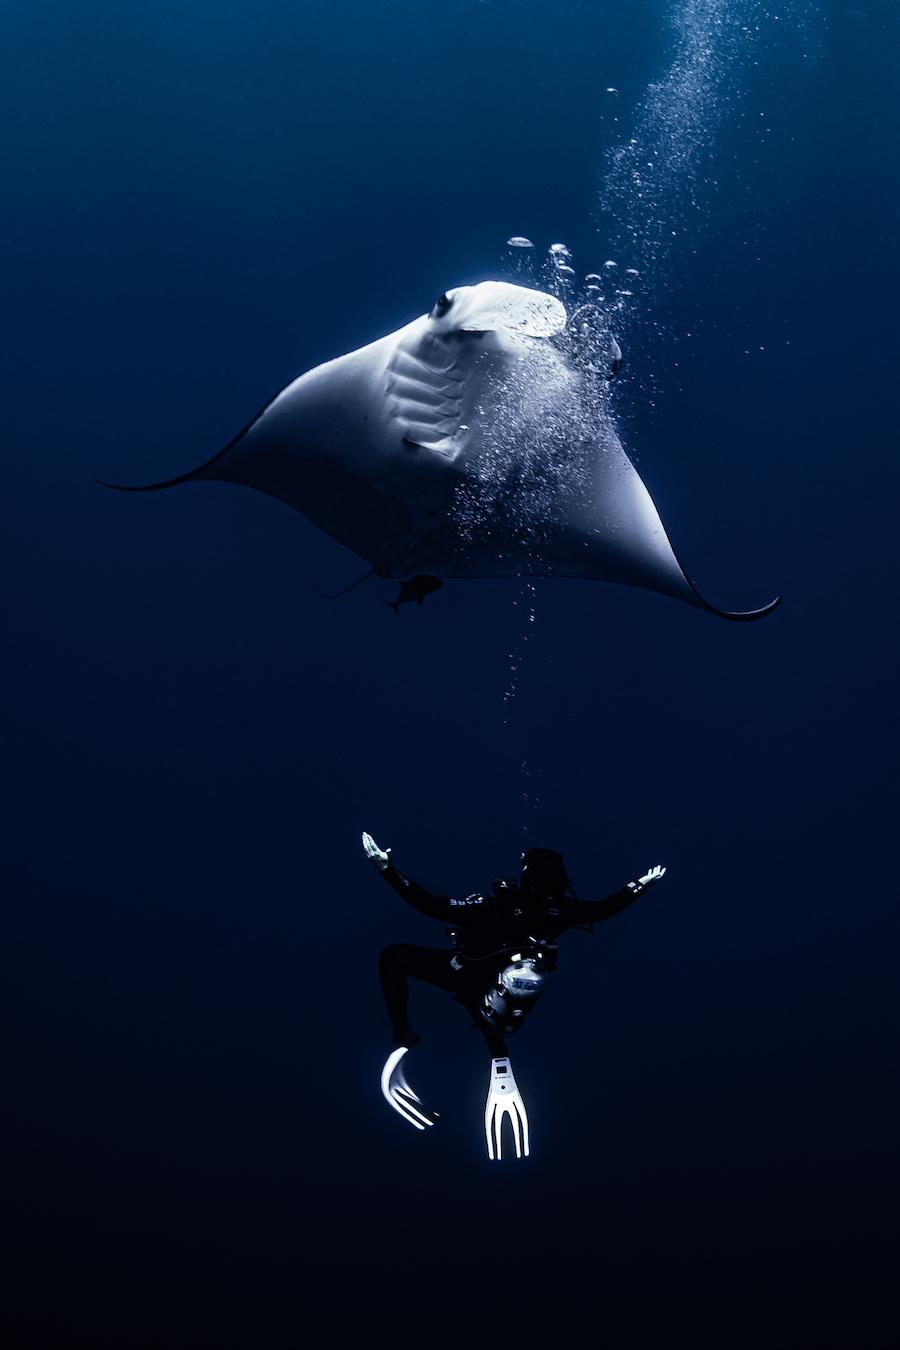 A giant oceanic manta ray photographed by Evan Friedman of the United States (Courtesy of Evan Friedman/World Nature Photography Award)